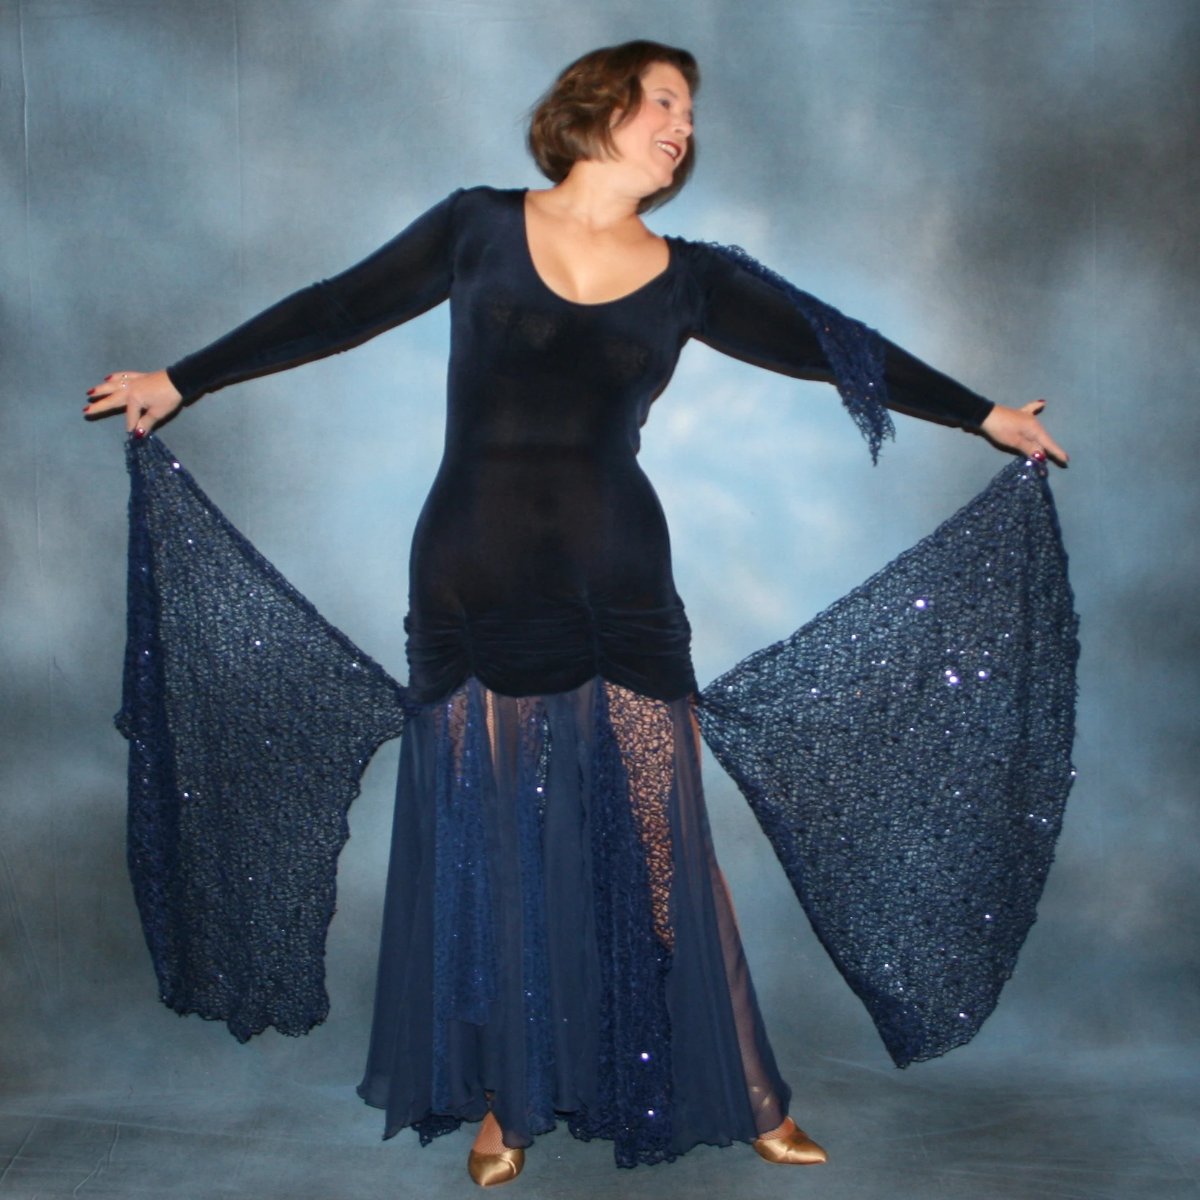 Crystal's Creations Ballroom dress created in luxurious navy blue solid slinky fabric with yards of gorgeous unique sequined mermaid net look lace & chiffon. The bottom of base of dress has ruching at the hip. A great social dress for any ballroom dance or special occasion, as well as a great beginner show dress!